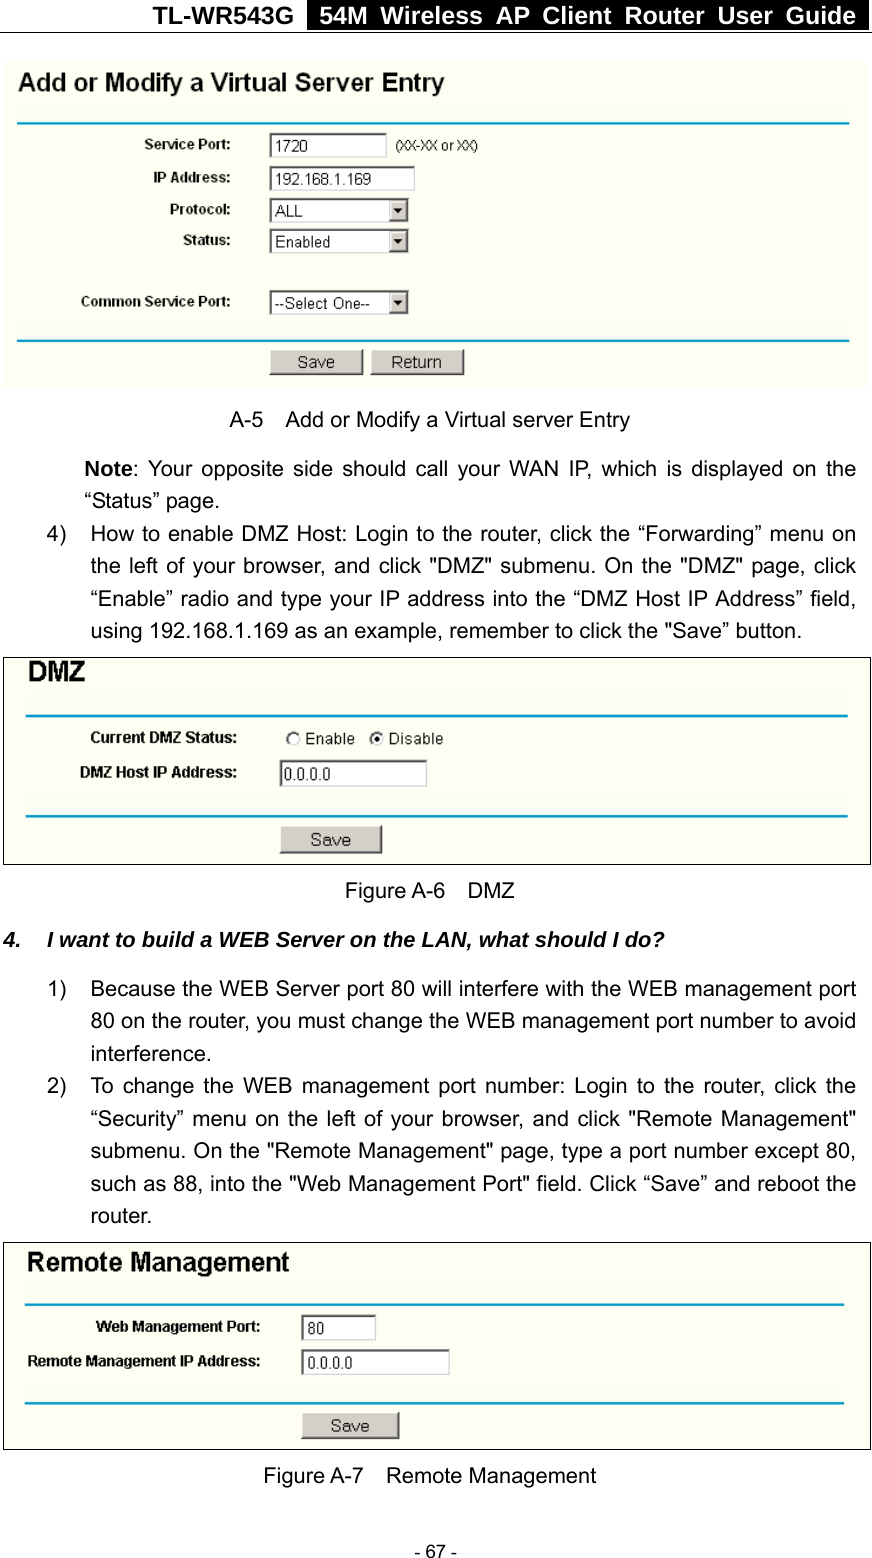 TL-WR543G   54M Wireless AP Client Router User Guide   A-5    Add or Modify a Virtual server Entry Note: Your opposite side should call your WAN IP, which is displayed on the “Status” page. 4)  How to enable DMZ Host: Login to the router, click the “Forwarding” menu on the left of your browser, and click &quot;DMZ&quot; submenu. On the &quot;DMZ&quot; page, click “Enable” radio and type your IP address into the “DMZ Host IP Address” field, using 192.168.1.169 as an example, remember to click the &quot;Save” button.    Figure A-6  DMZ 4.  I want to build a WEB Server on the LAN, what should I do? 1)  Because the WEB Server port 80 will interfere with the WEB management port 80 on the router, you must change the WEB management port number to avoid interference. 2)  To change the WEB management port number: Login to the router, click the “Security” menu on the left of your browser, and click &quot;Remote Management&quot; submenu. On the &quot;Remote Management&quot; page, type a port number except 80, such as 88, into the &quot;Web Management Port&quot; field. Click “Save” and reboot the router.  Figure A-7  Remote Management  - 67 - 